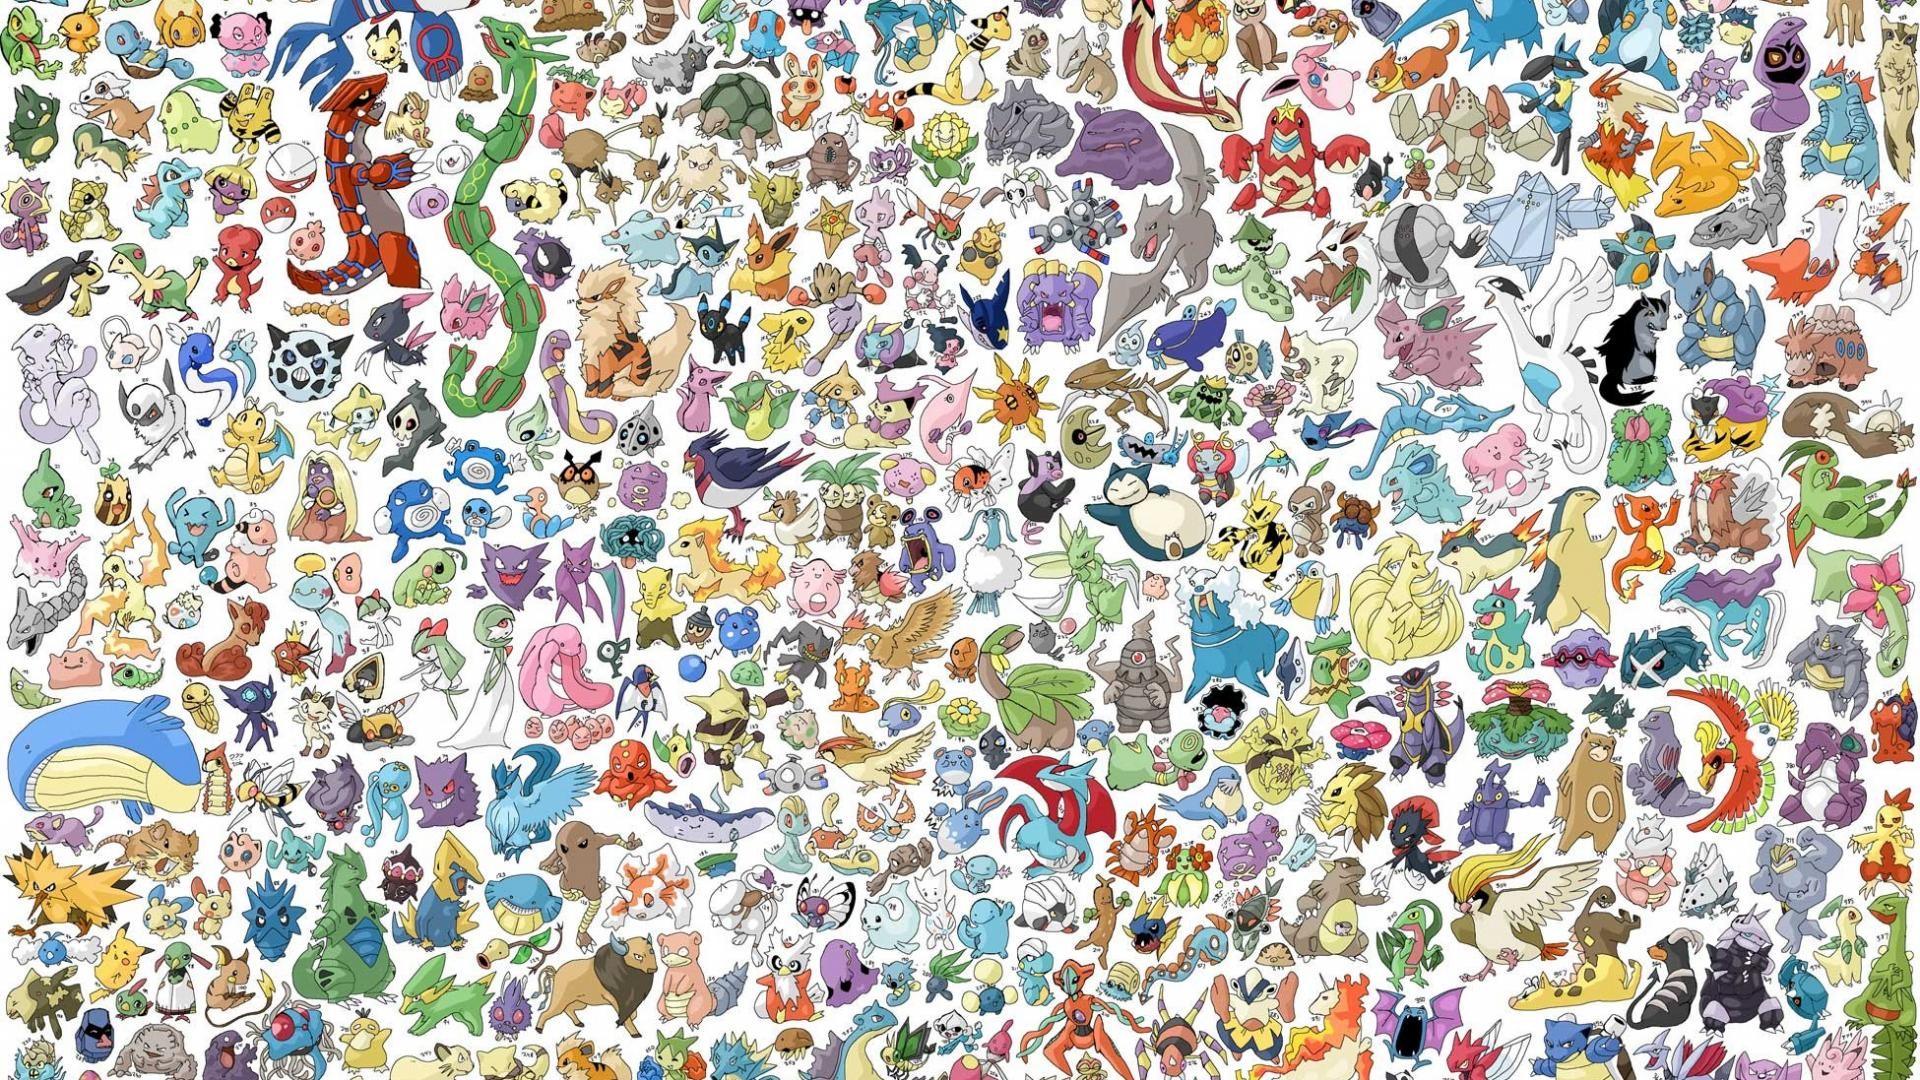 Pokemon wallpapers by request High Quality